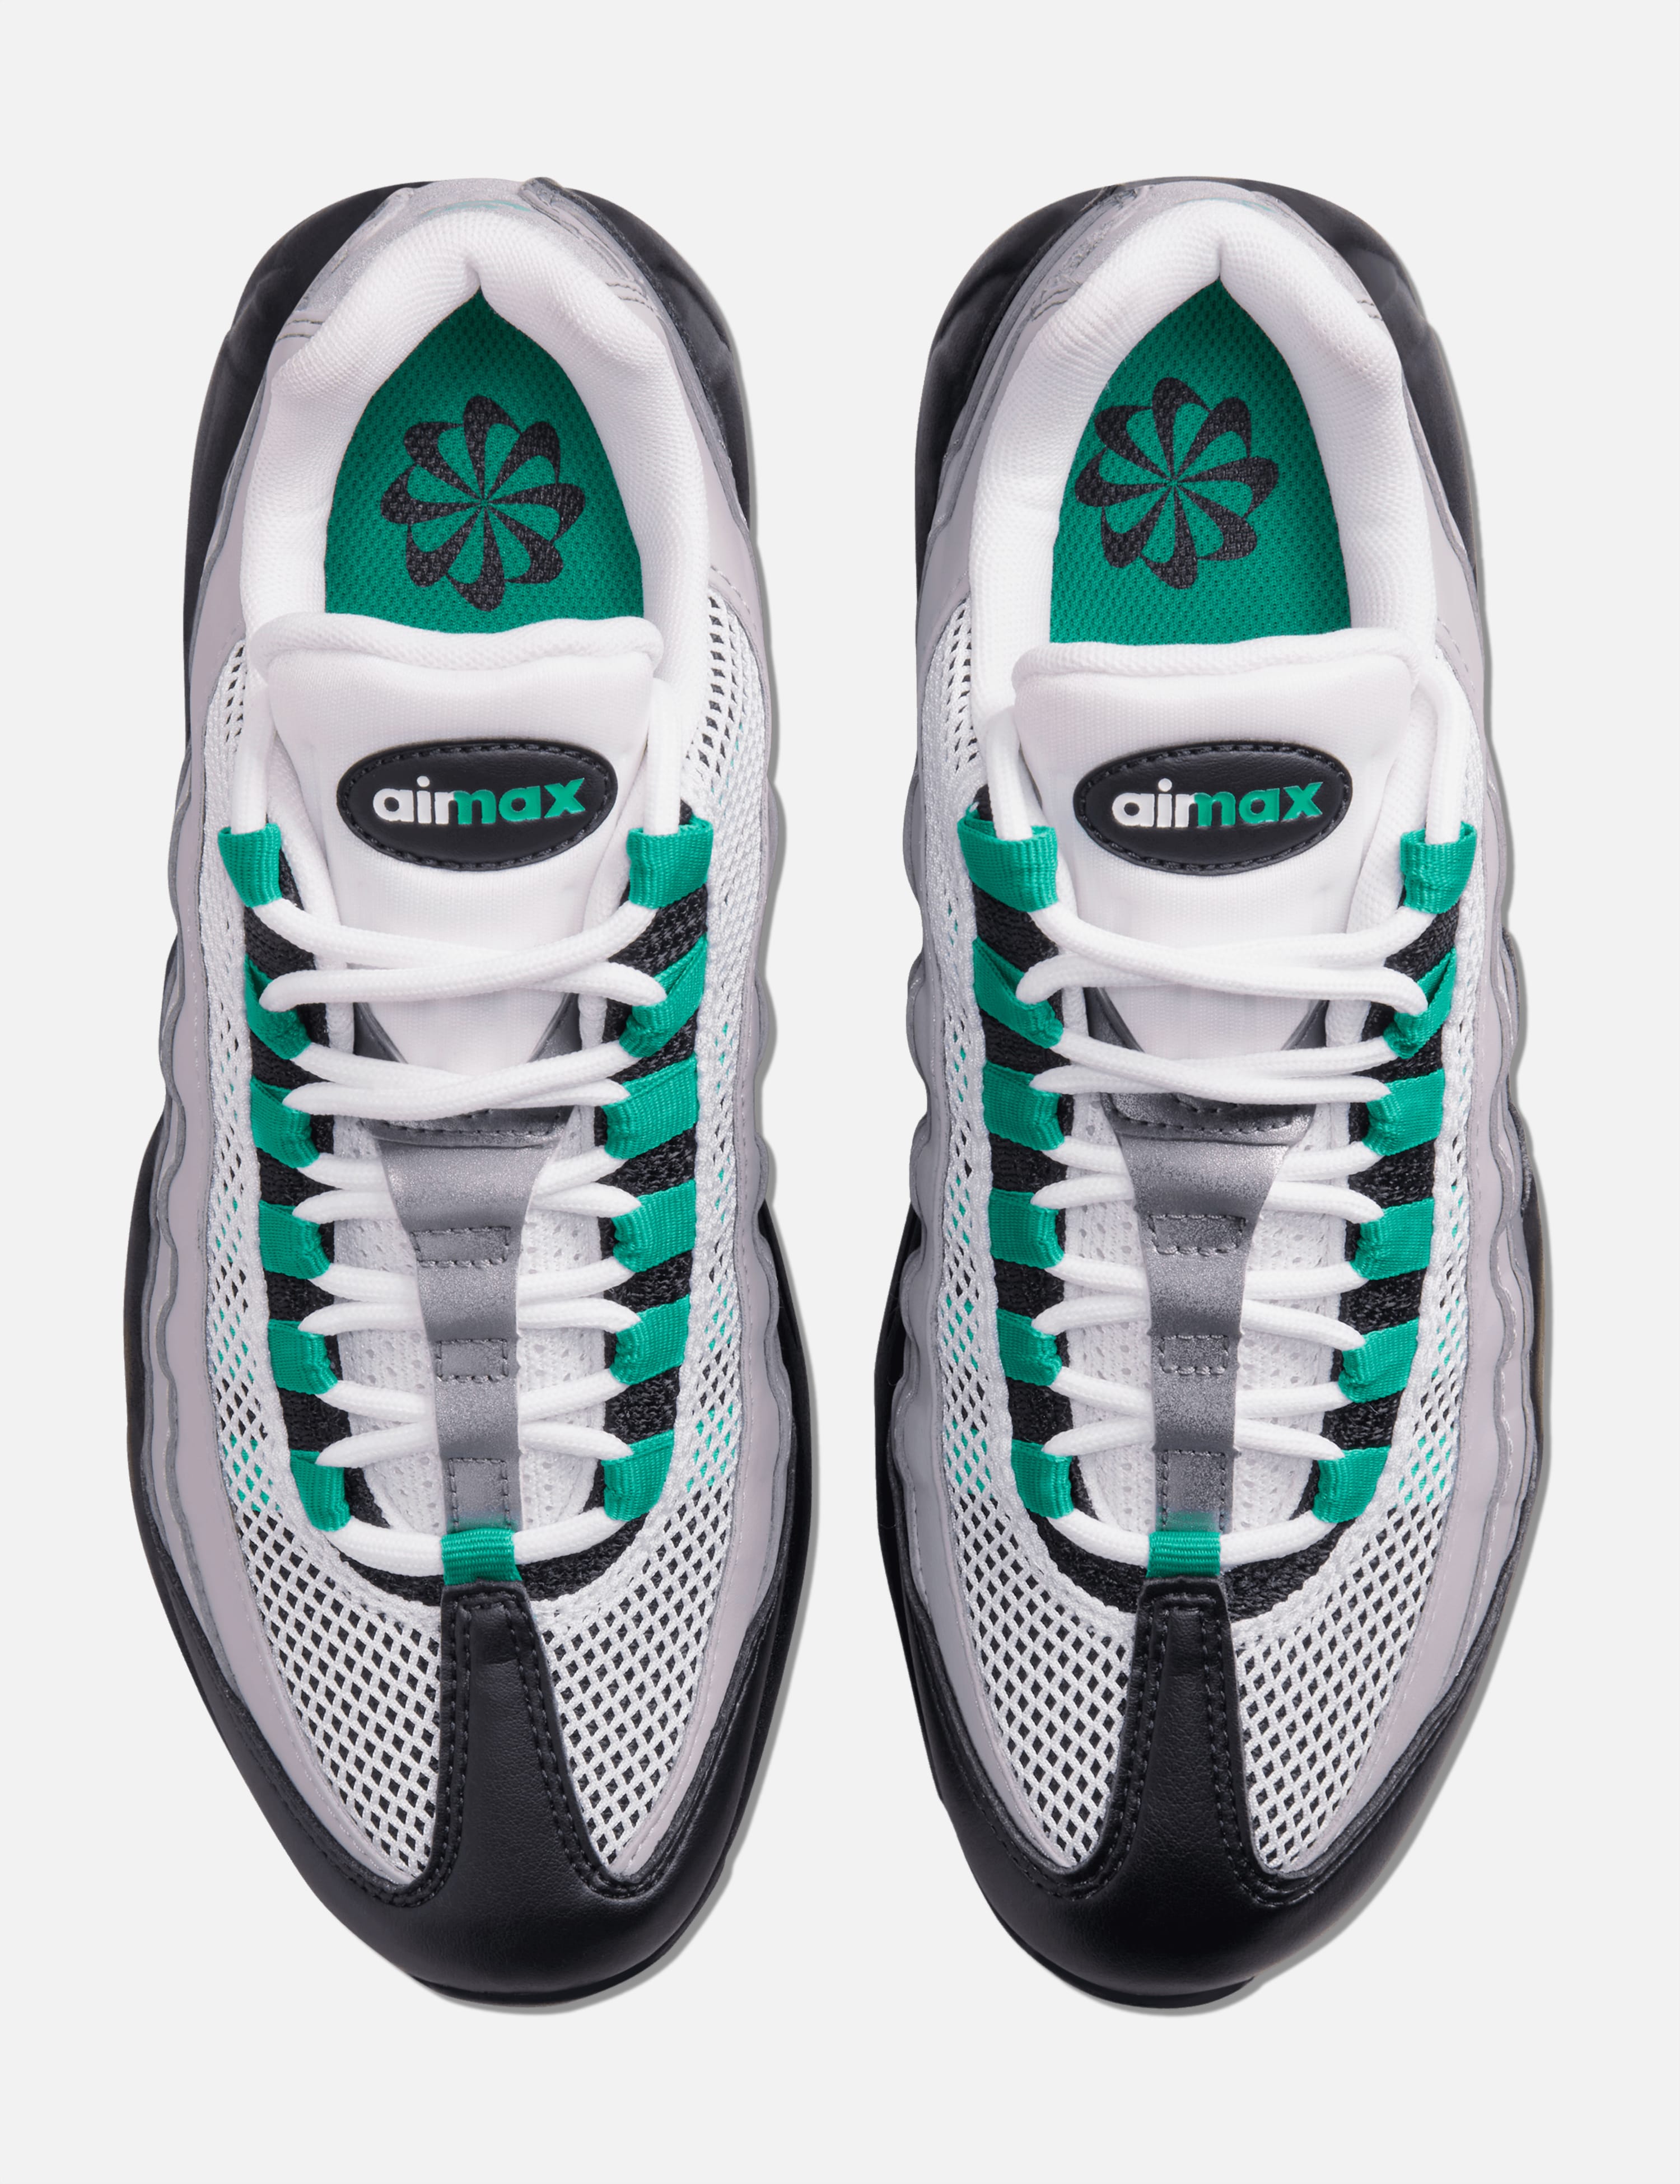 Nike - NIKE AIR MAX 95 | HBX - Globally Curated Fashion and